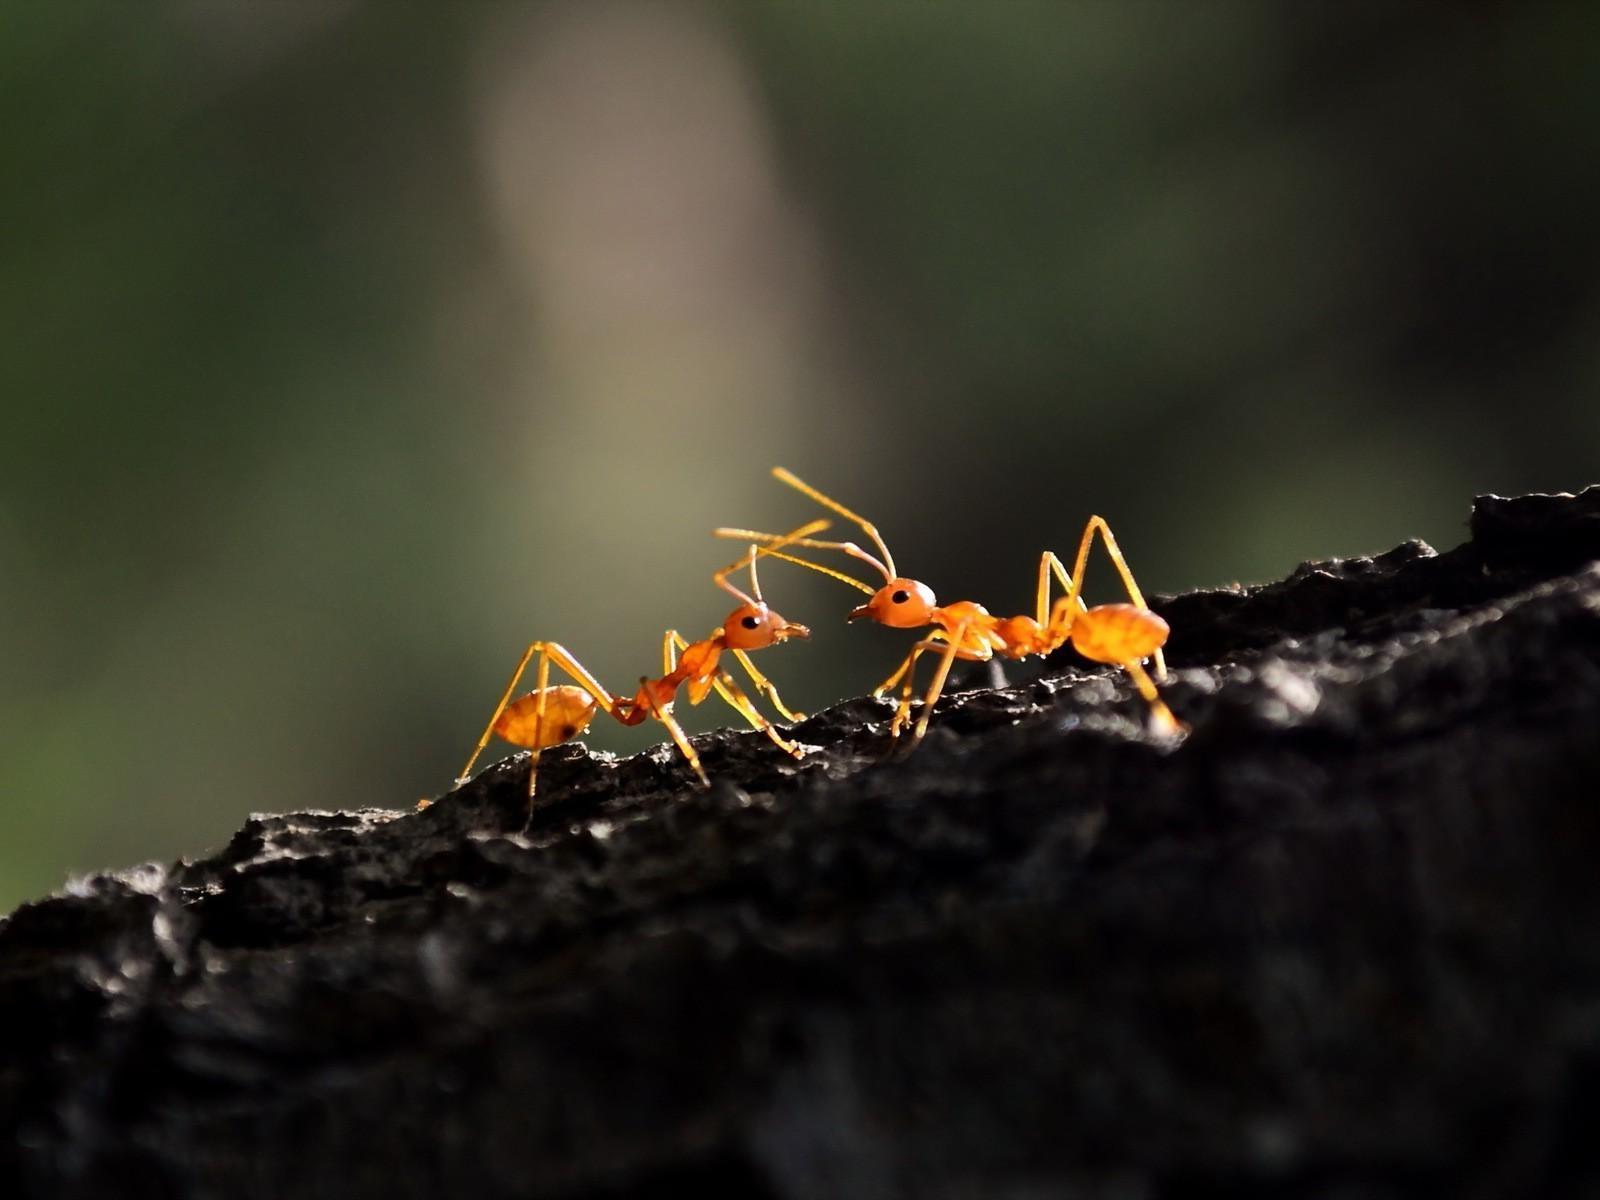 Ant Wallpaper Hd Download, Ant, Animal